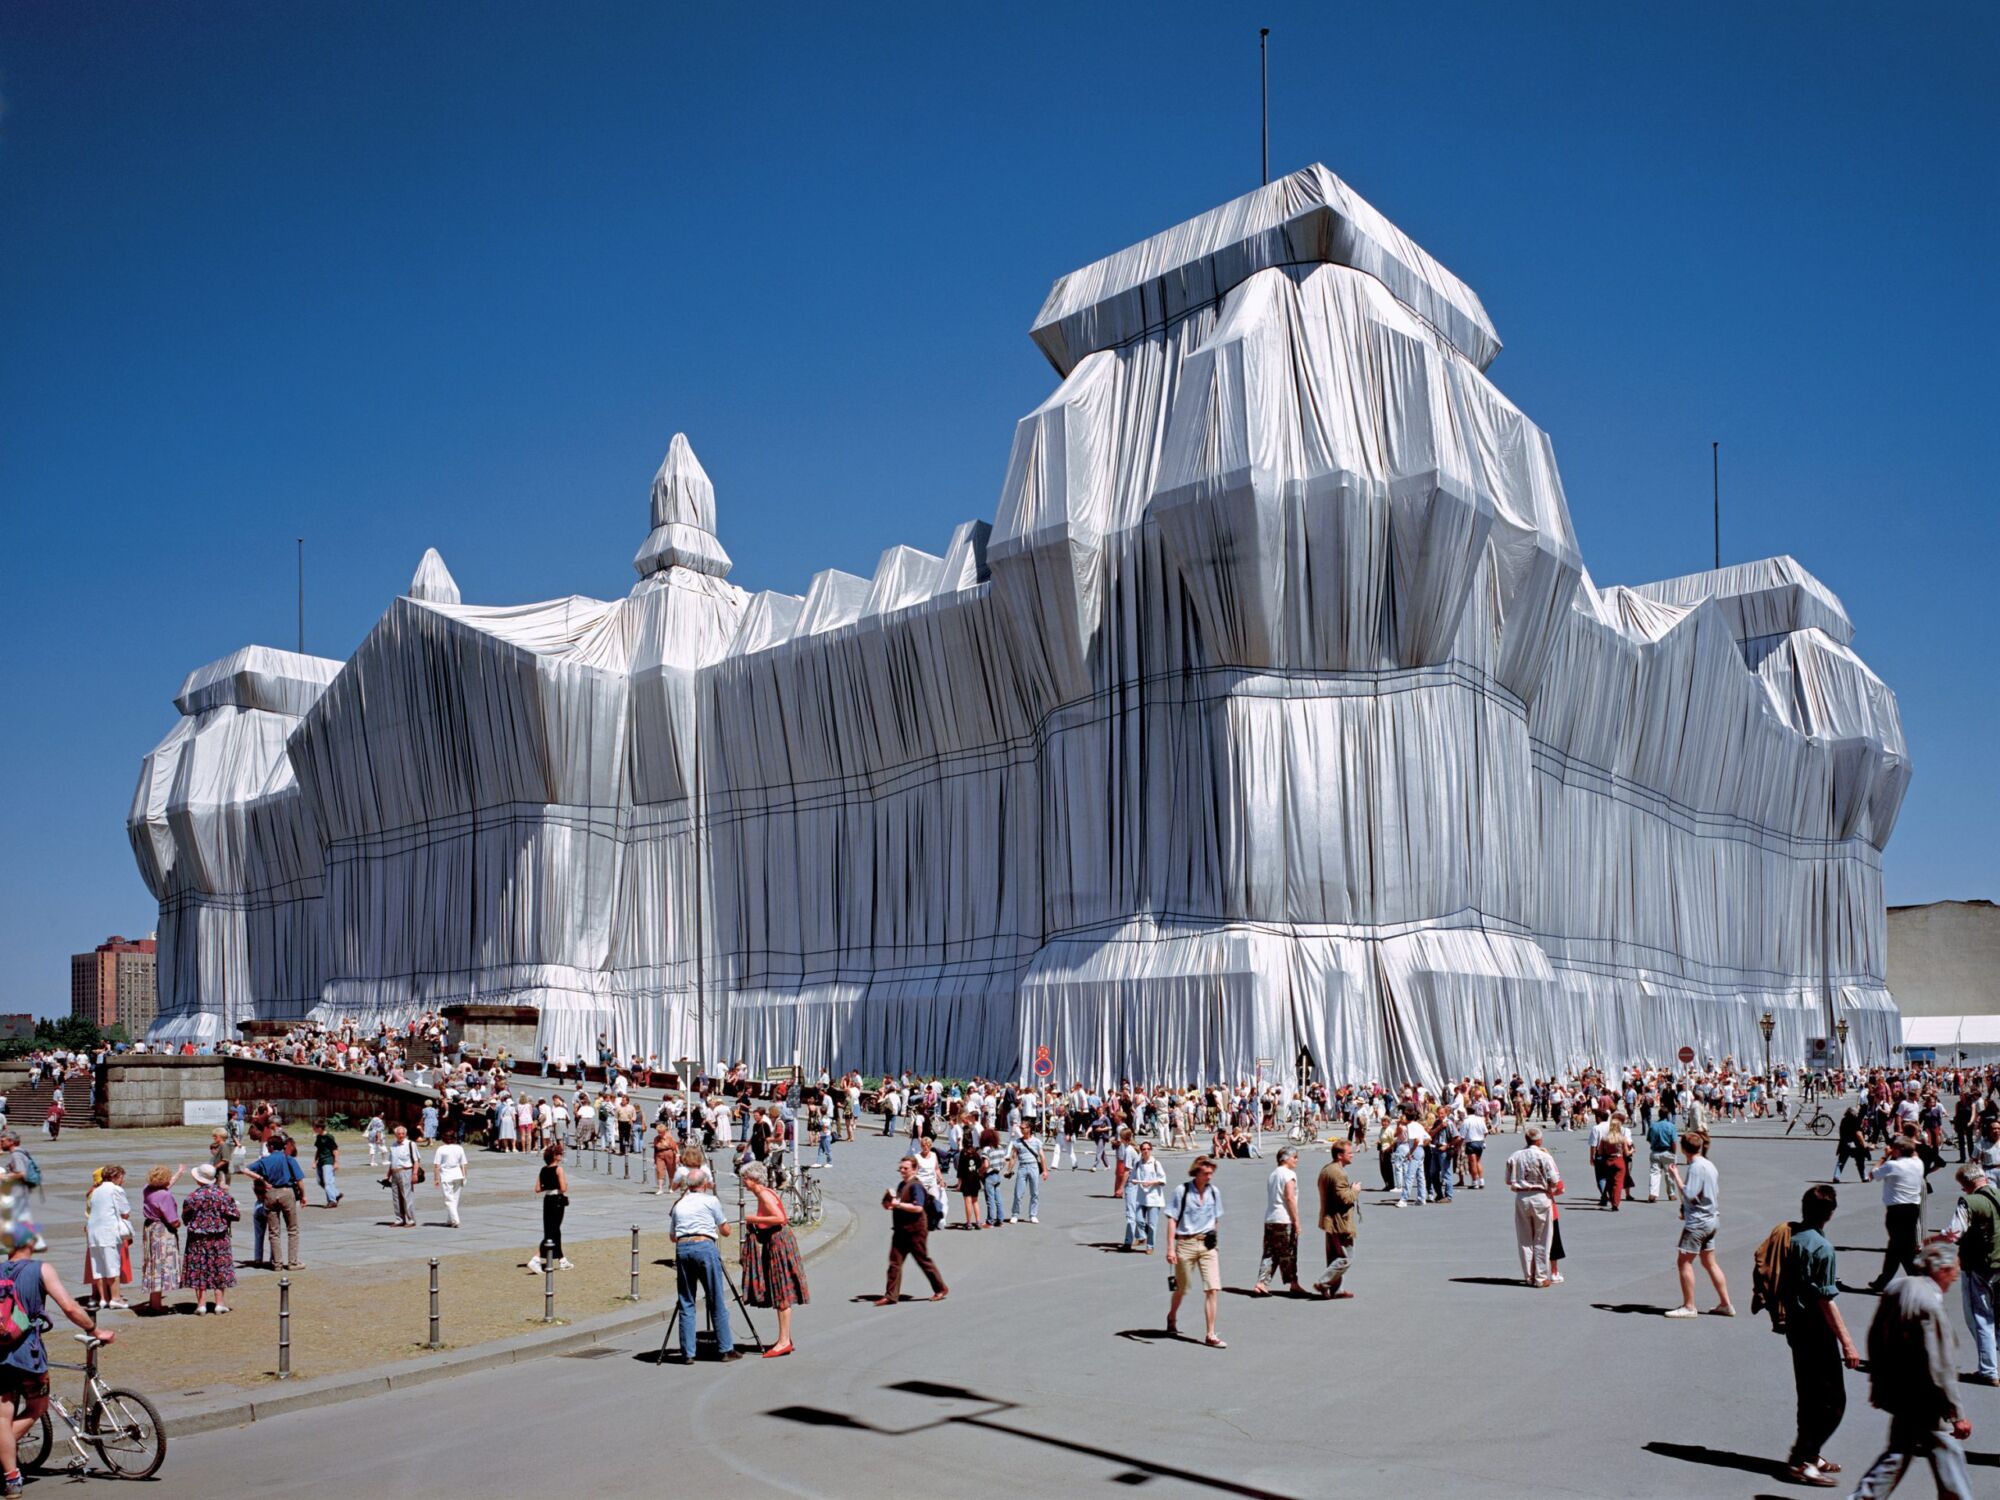 The Wick - Christo and Jeanne-Claude Foundation, 2022. Saatchi Gallery.